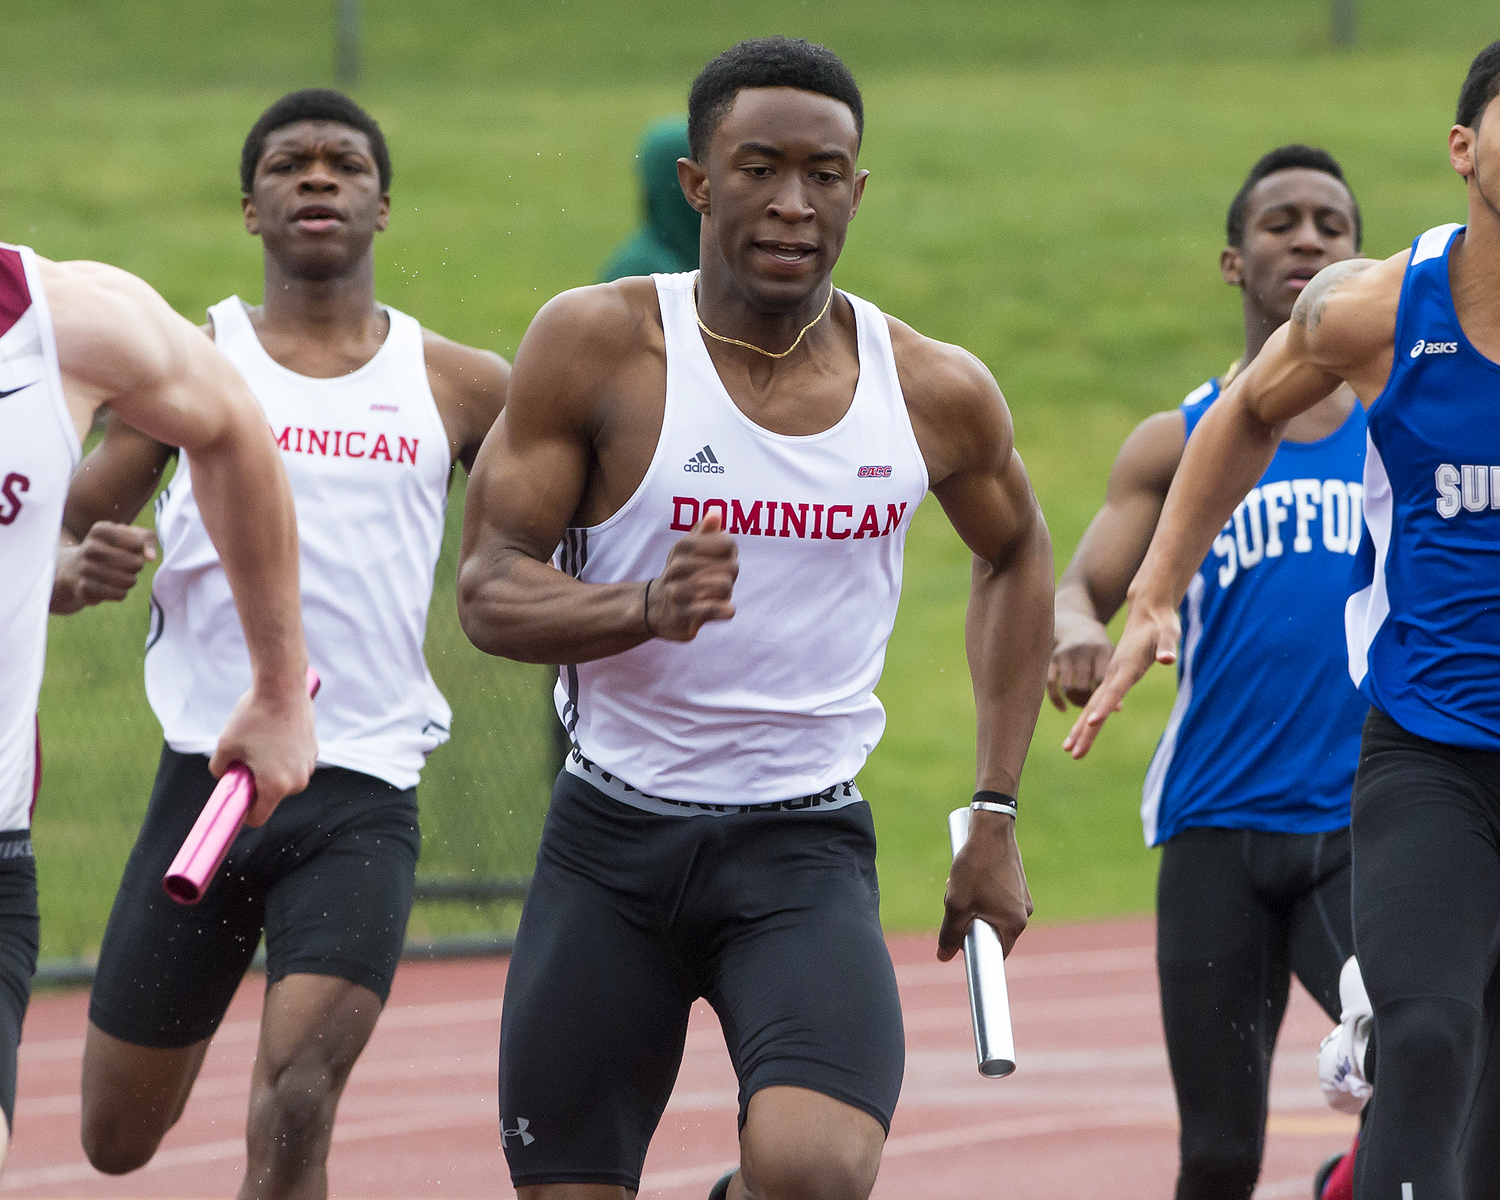 CHARGERS TRACK TRAVEL TO ALL-AMERICAN MEET